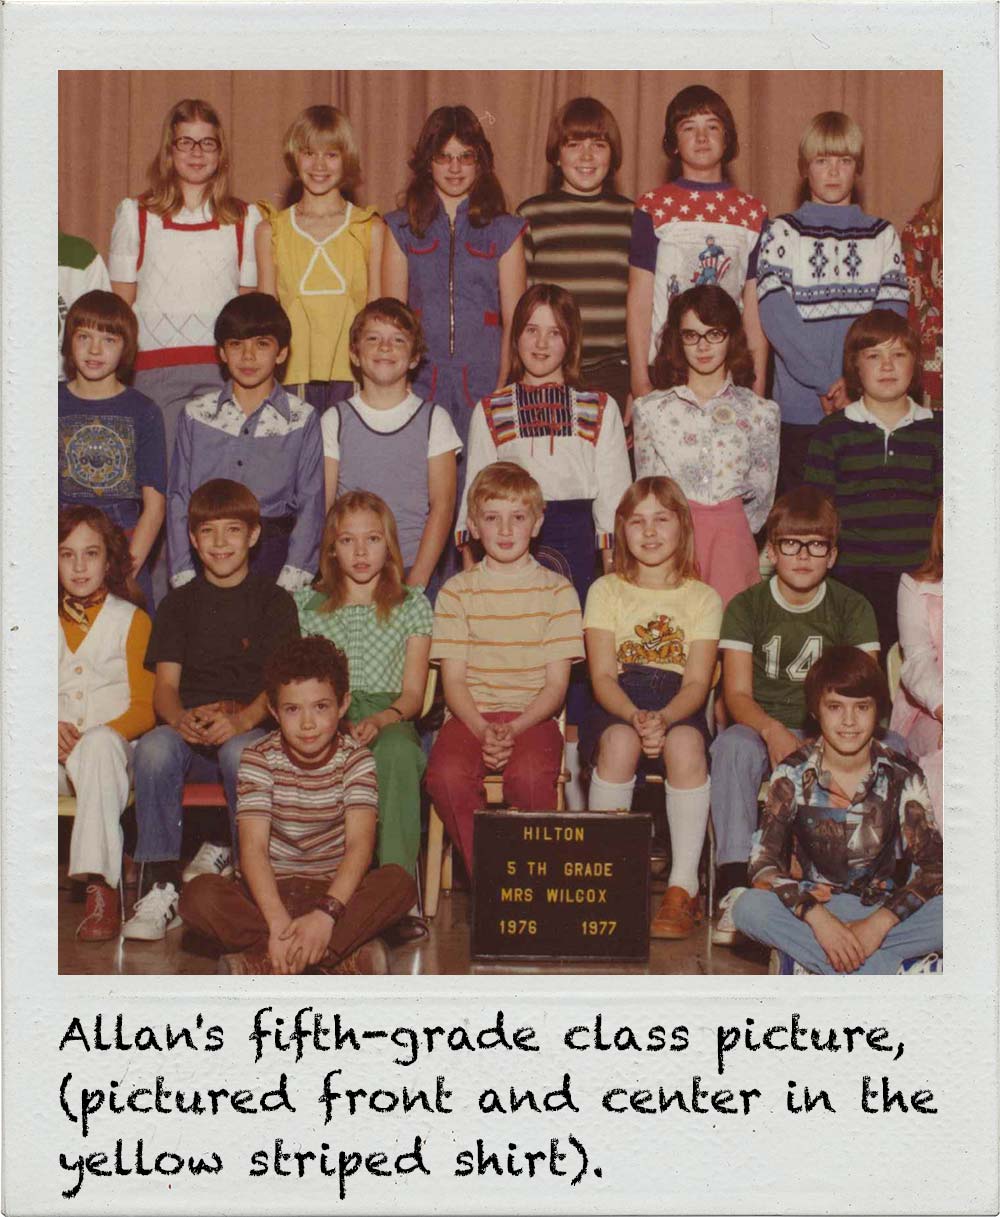 Allan's fifth-grade class picture, taken in Zillah, Washington, where he grew up (pictured front and center in the yellow striped shirt).